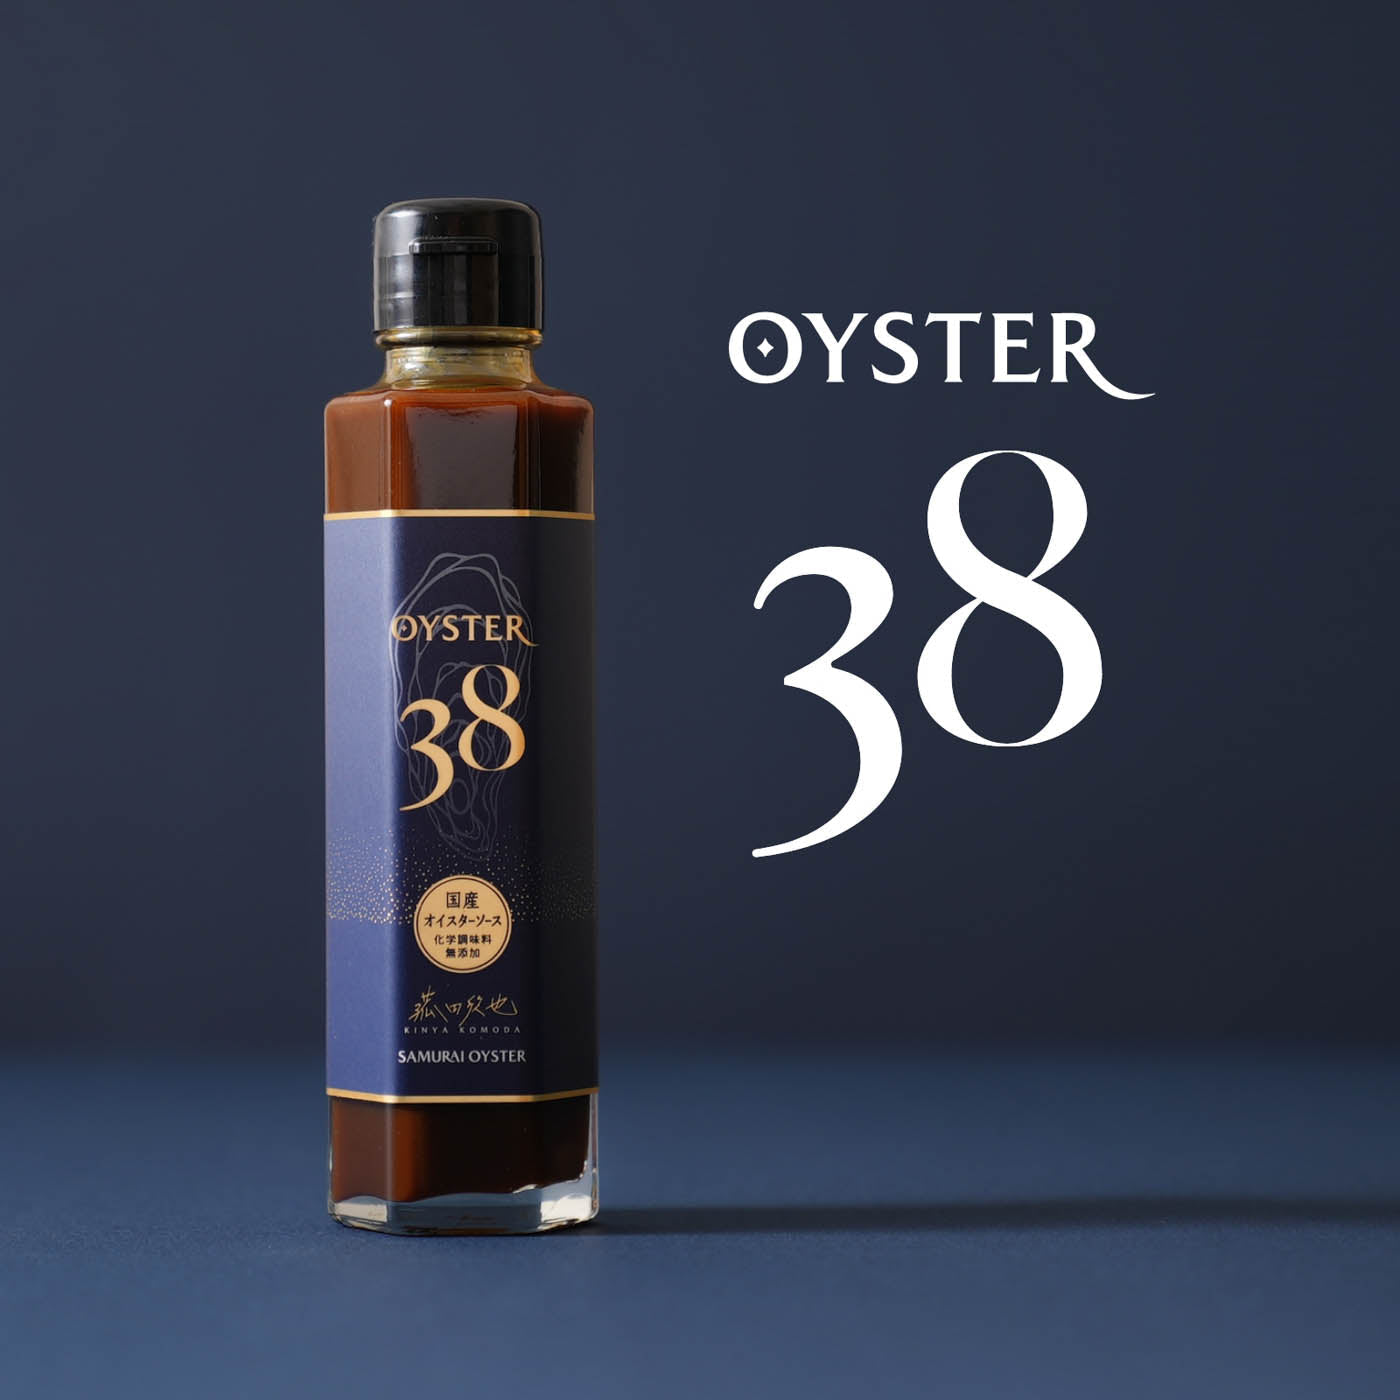 Oyster38